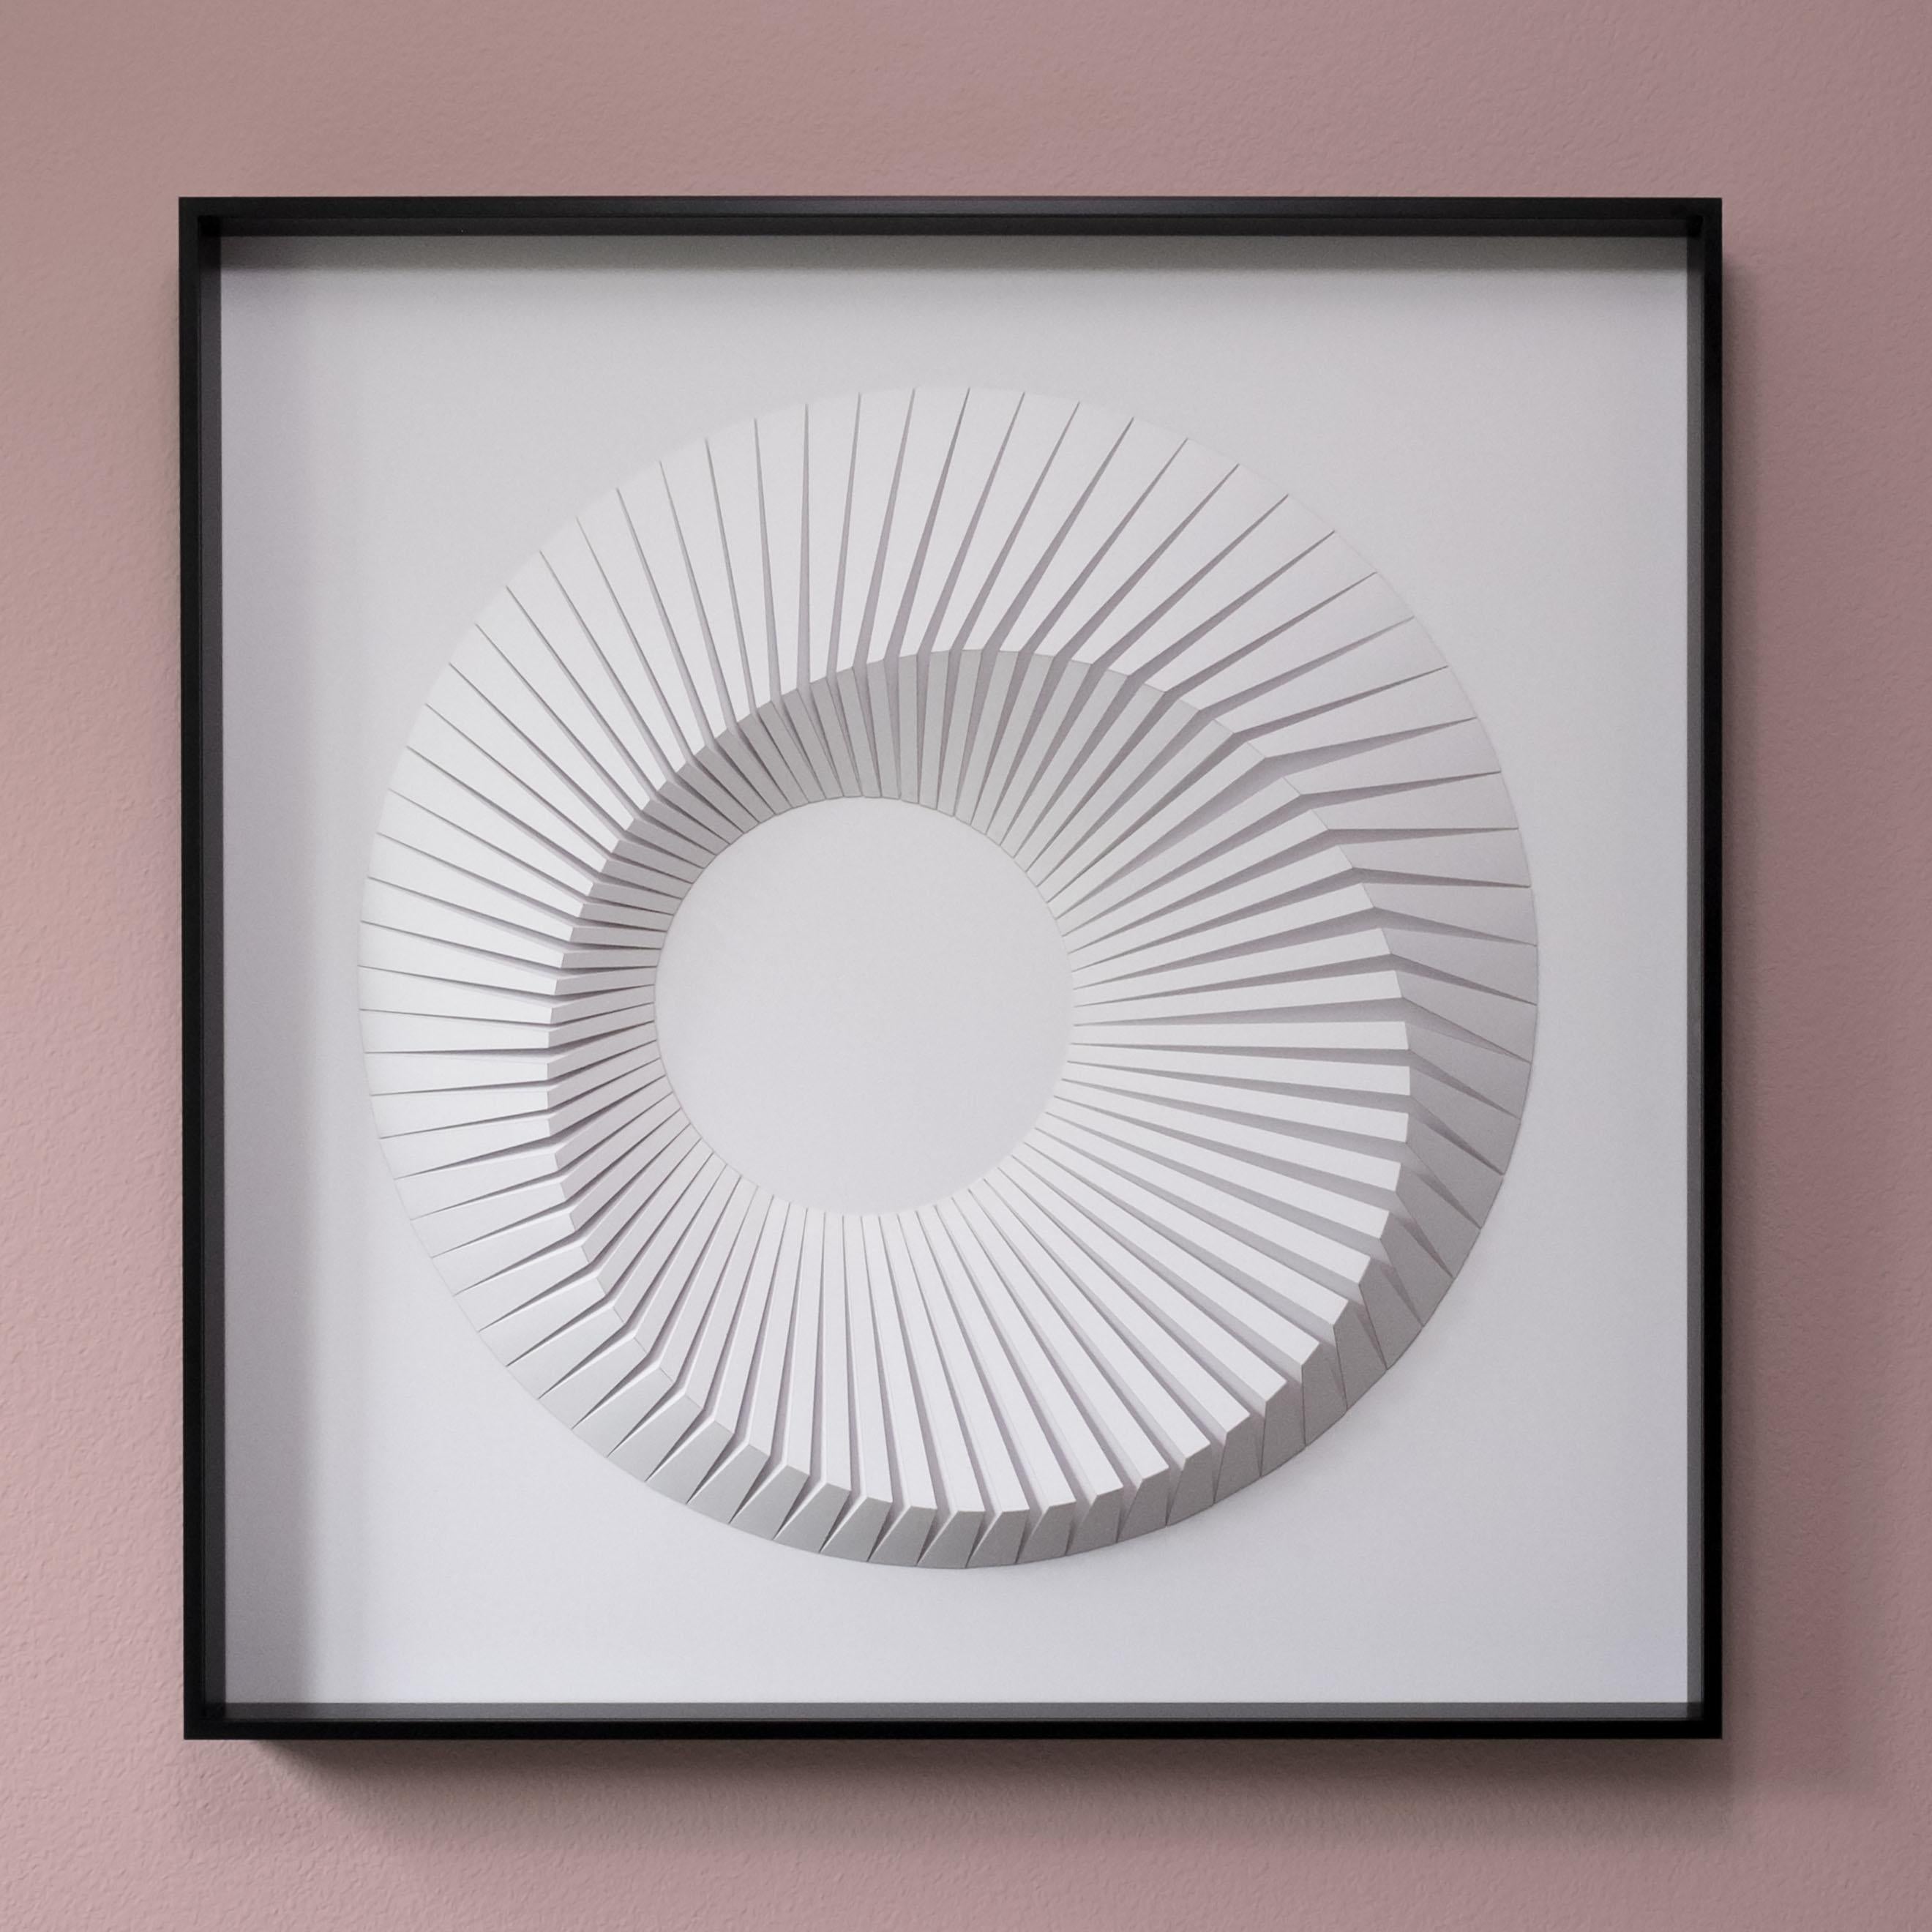 This beautiful geometric abstract wall sculpture is made out of white laser cut paper that was hand folded by Yossi Ben Abu and mound on cardboard.
